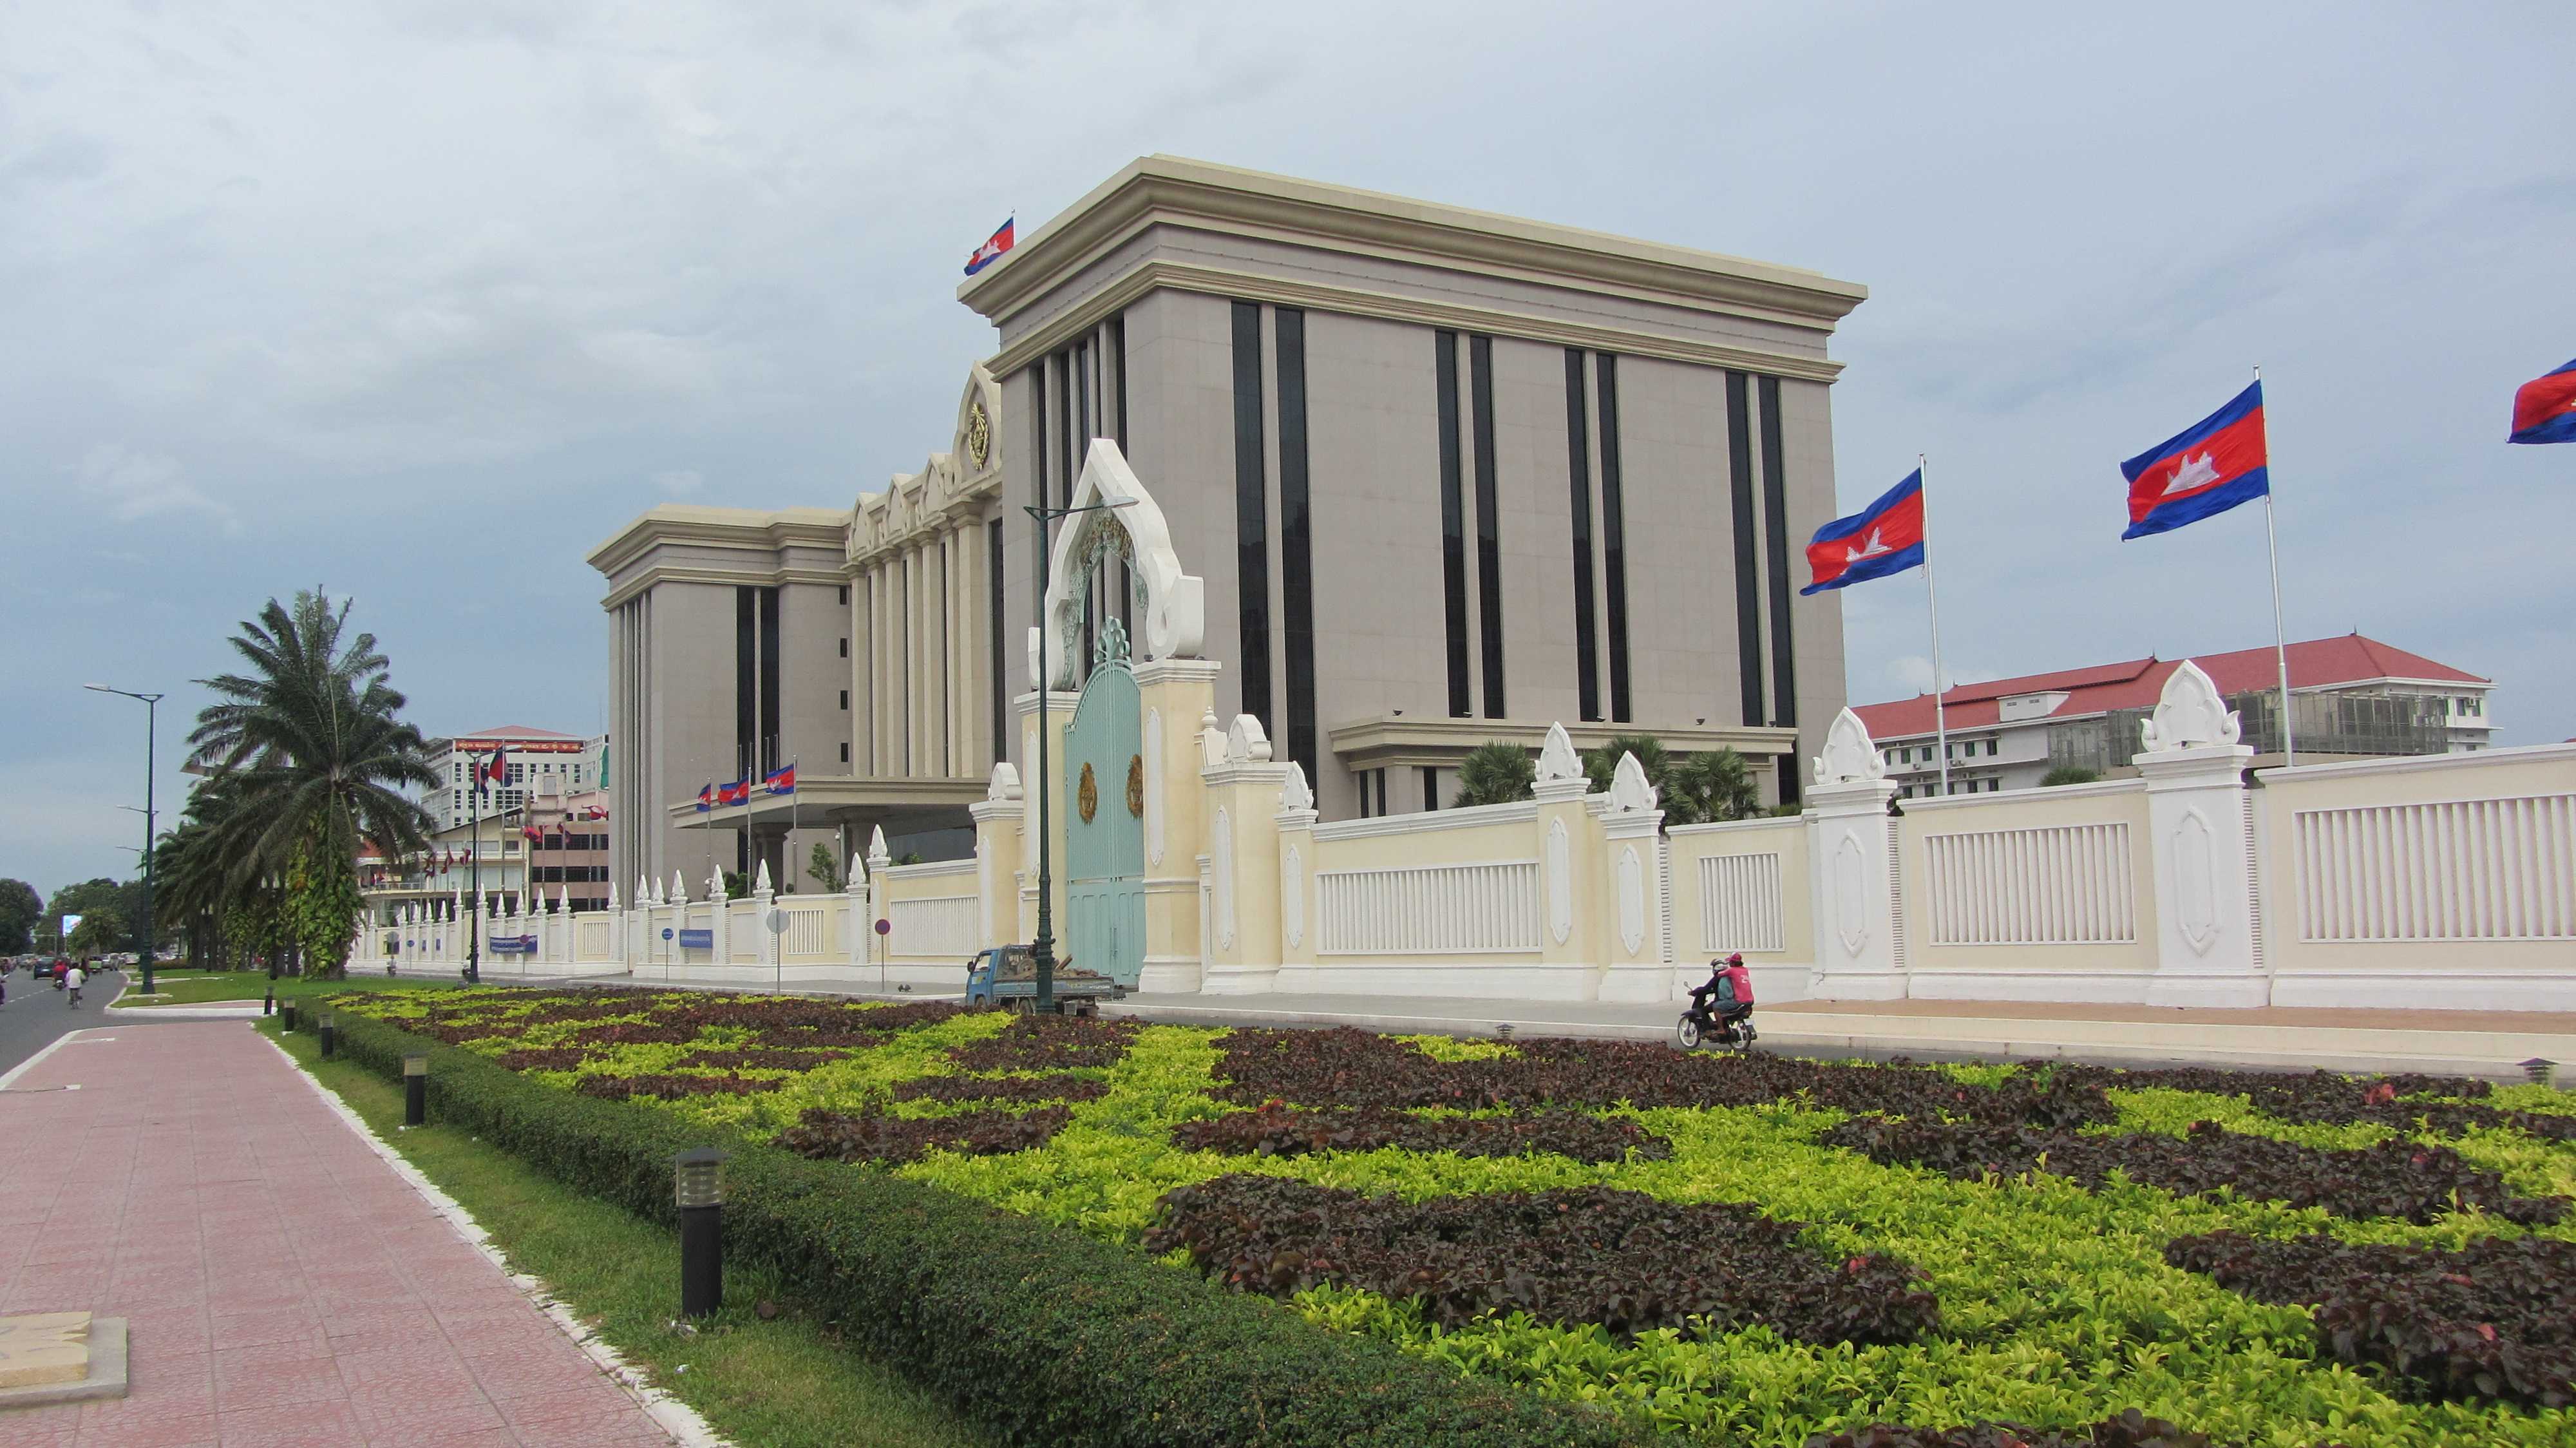 Peace Palace, Cambodia, also known as the Office of the Prime Minister of Cambodia